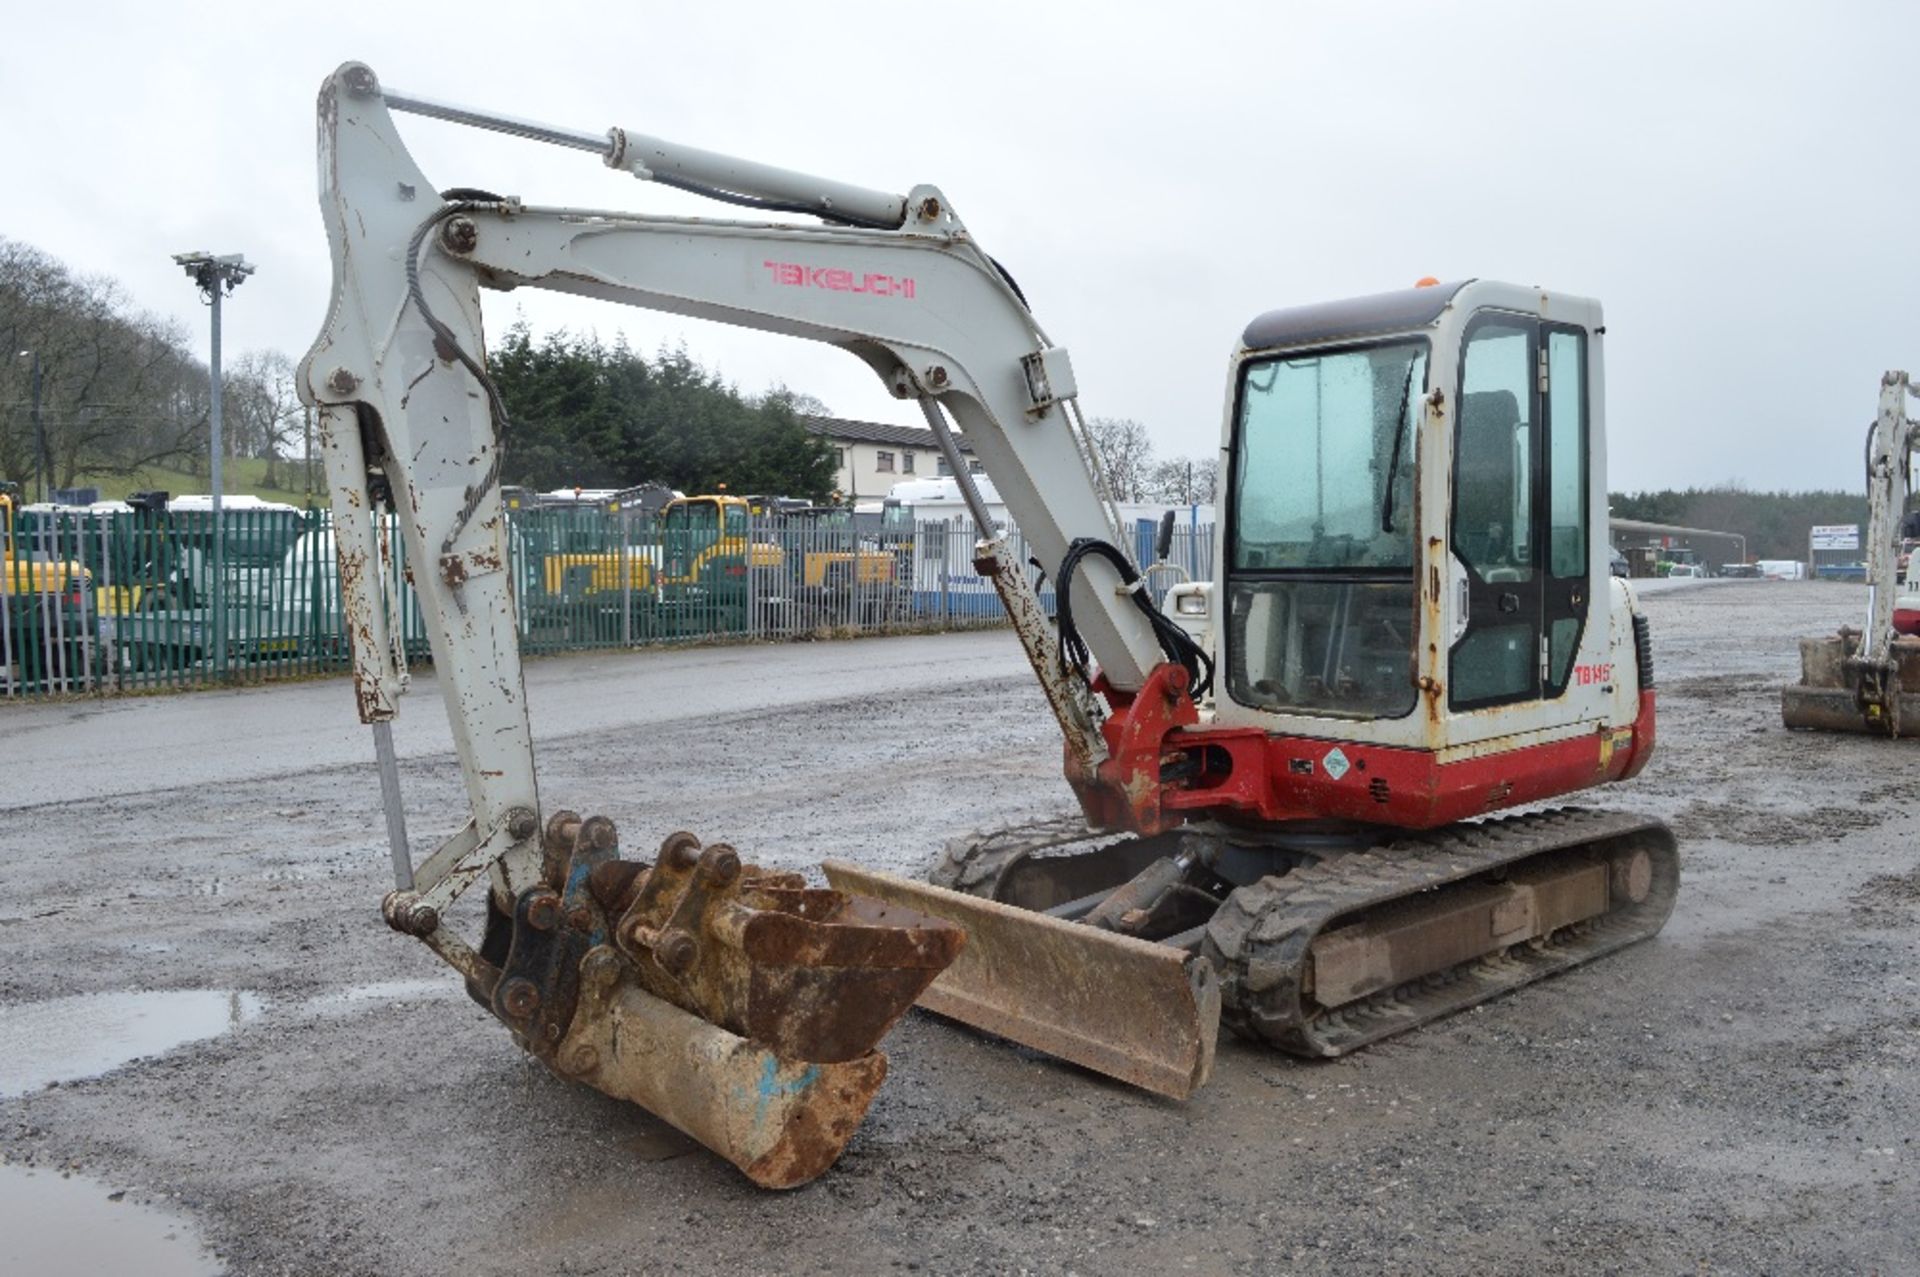 Takeuchi TB145 4.5 tonne rubber tracked midi excavator
Year: 2007
S/N: 14517066
Recorded Hours: